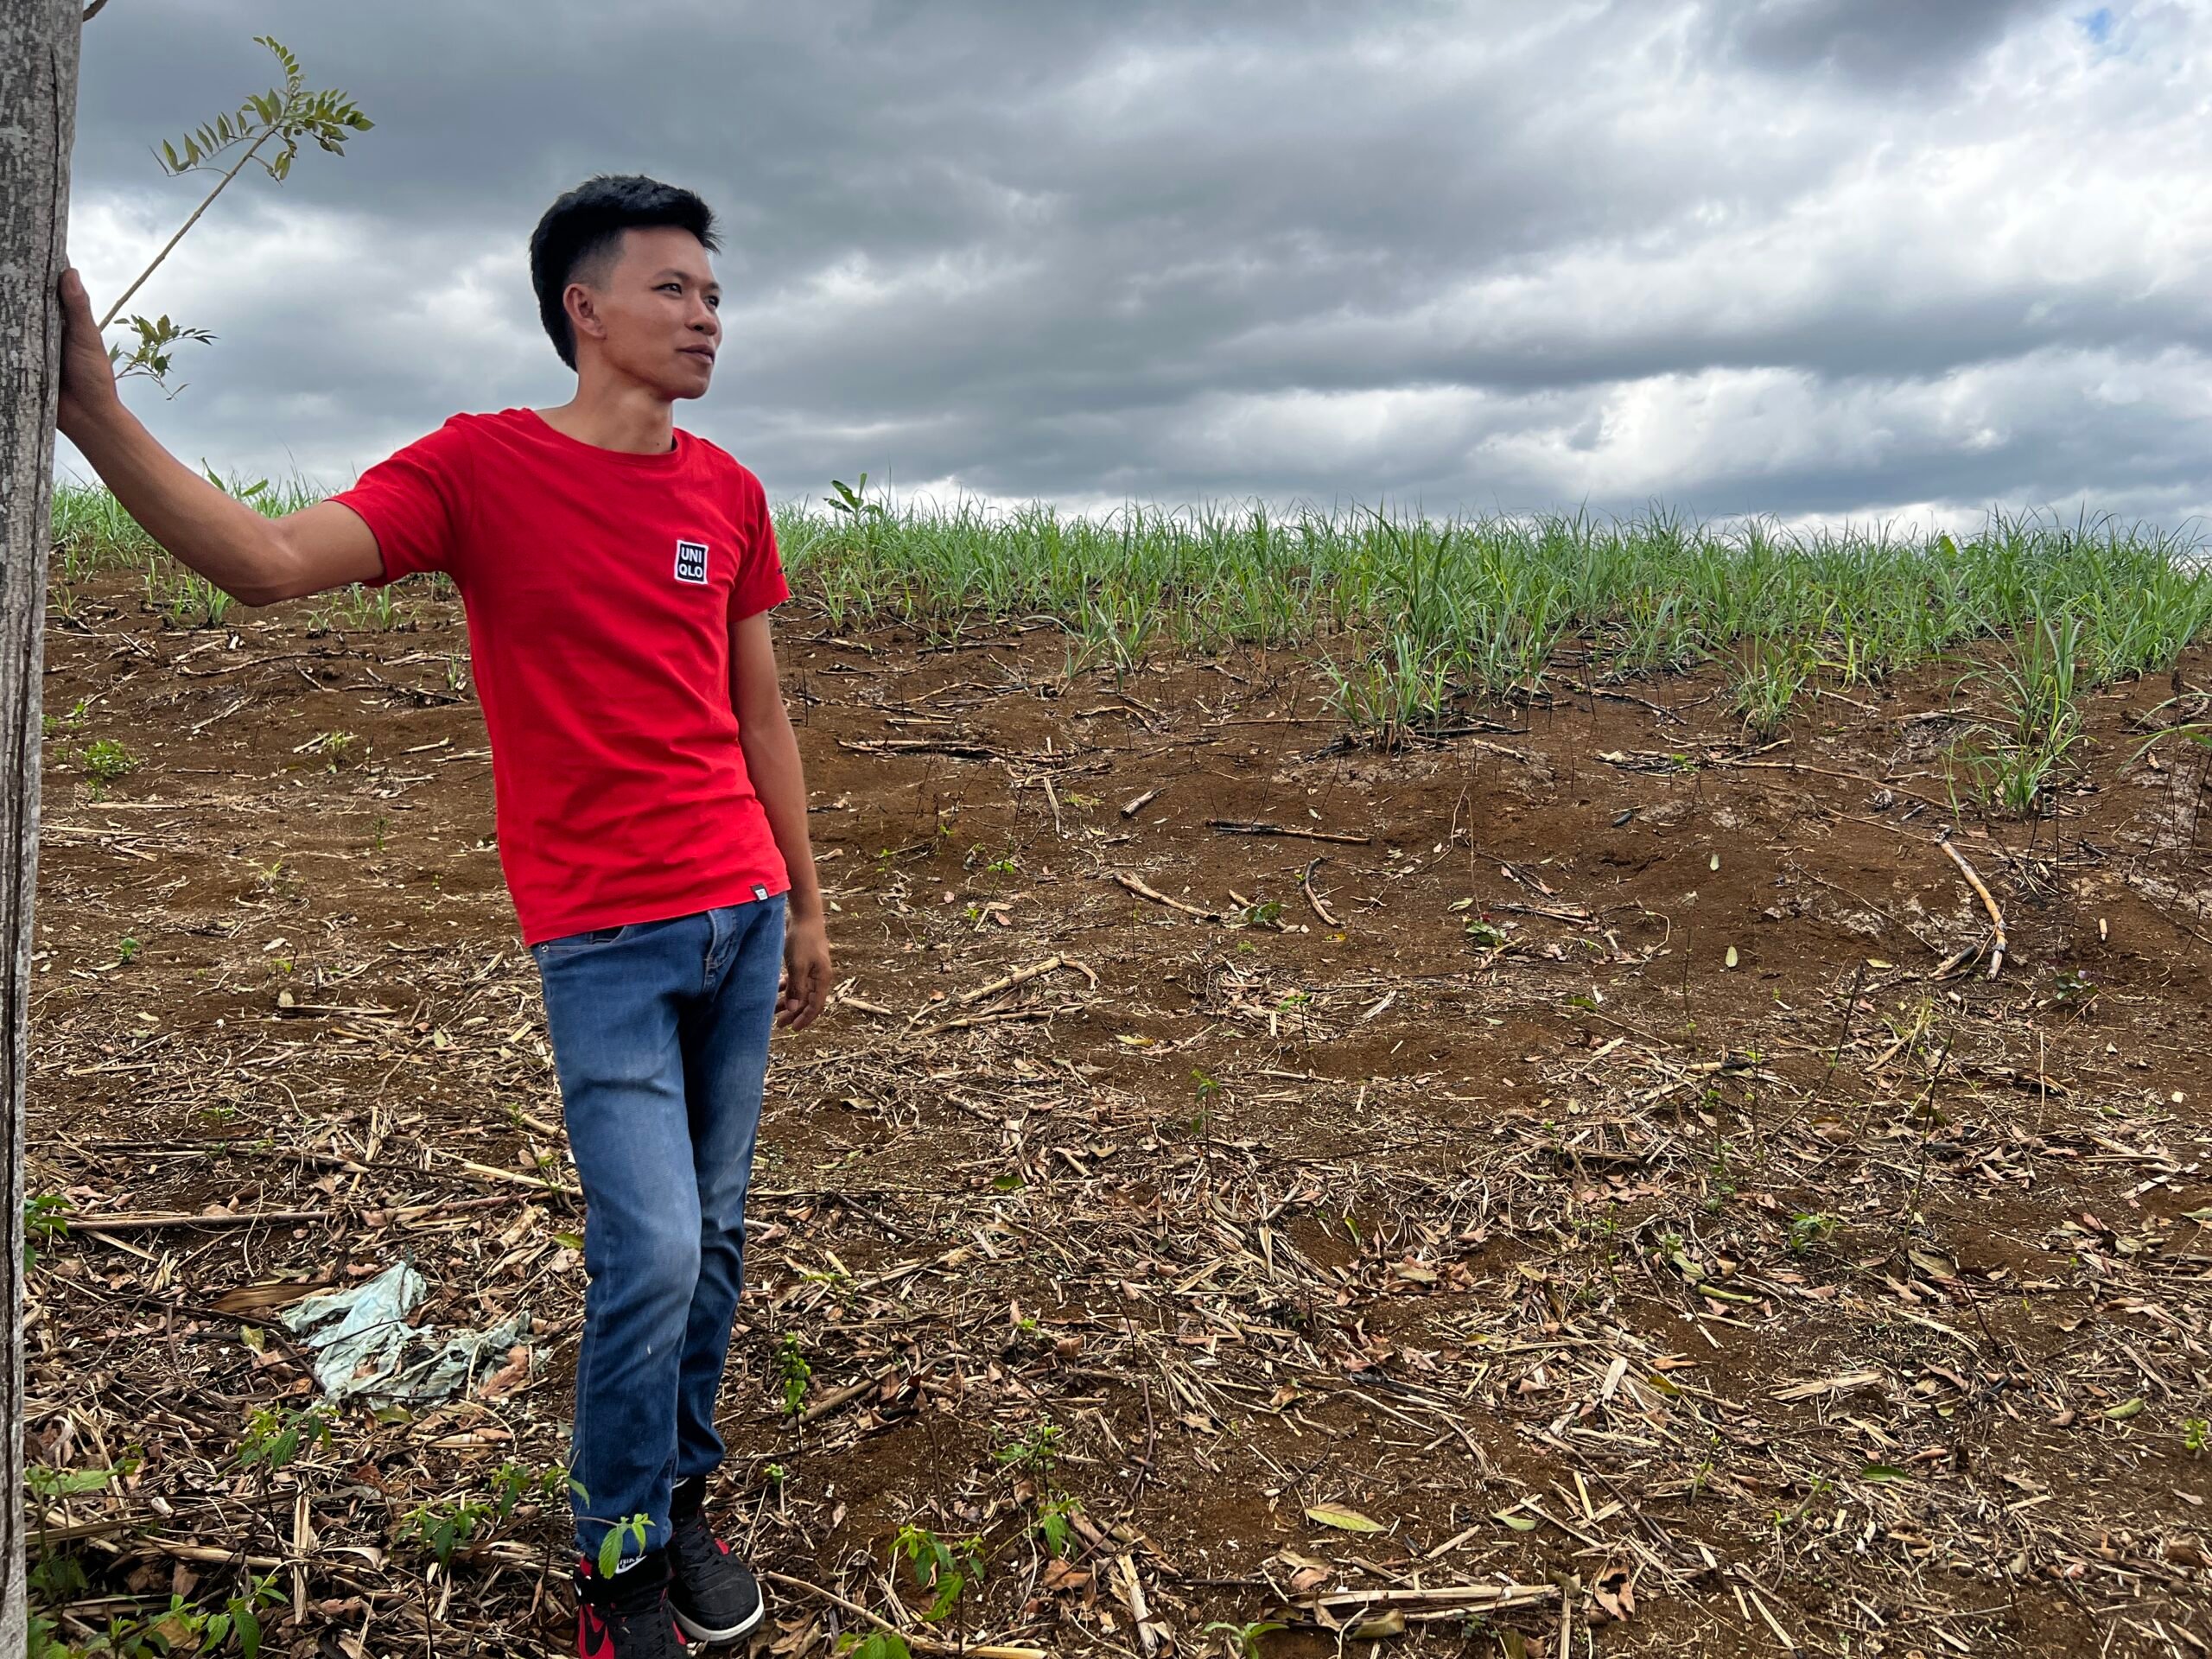 A man in a red tshirt leans against a post and surveys a large brown and green field under a cloudy sky.